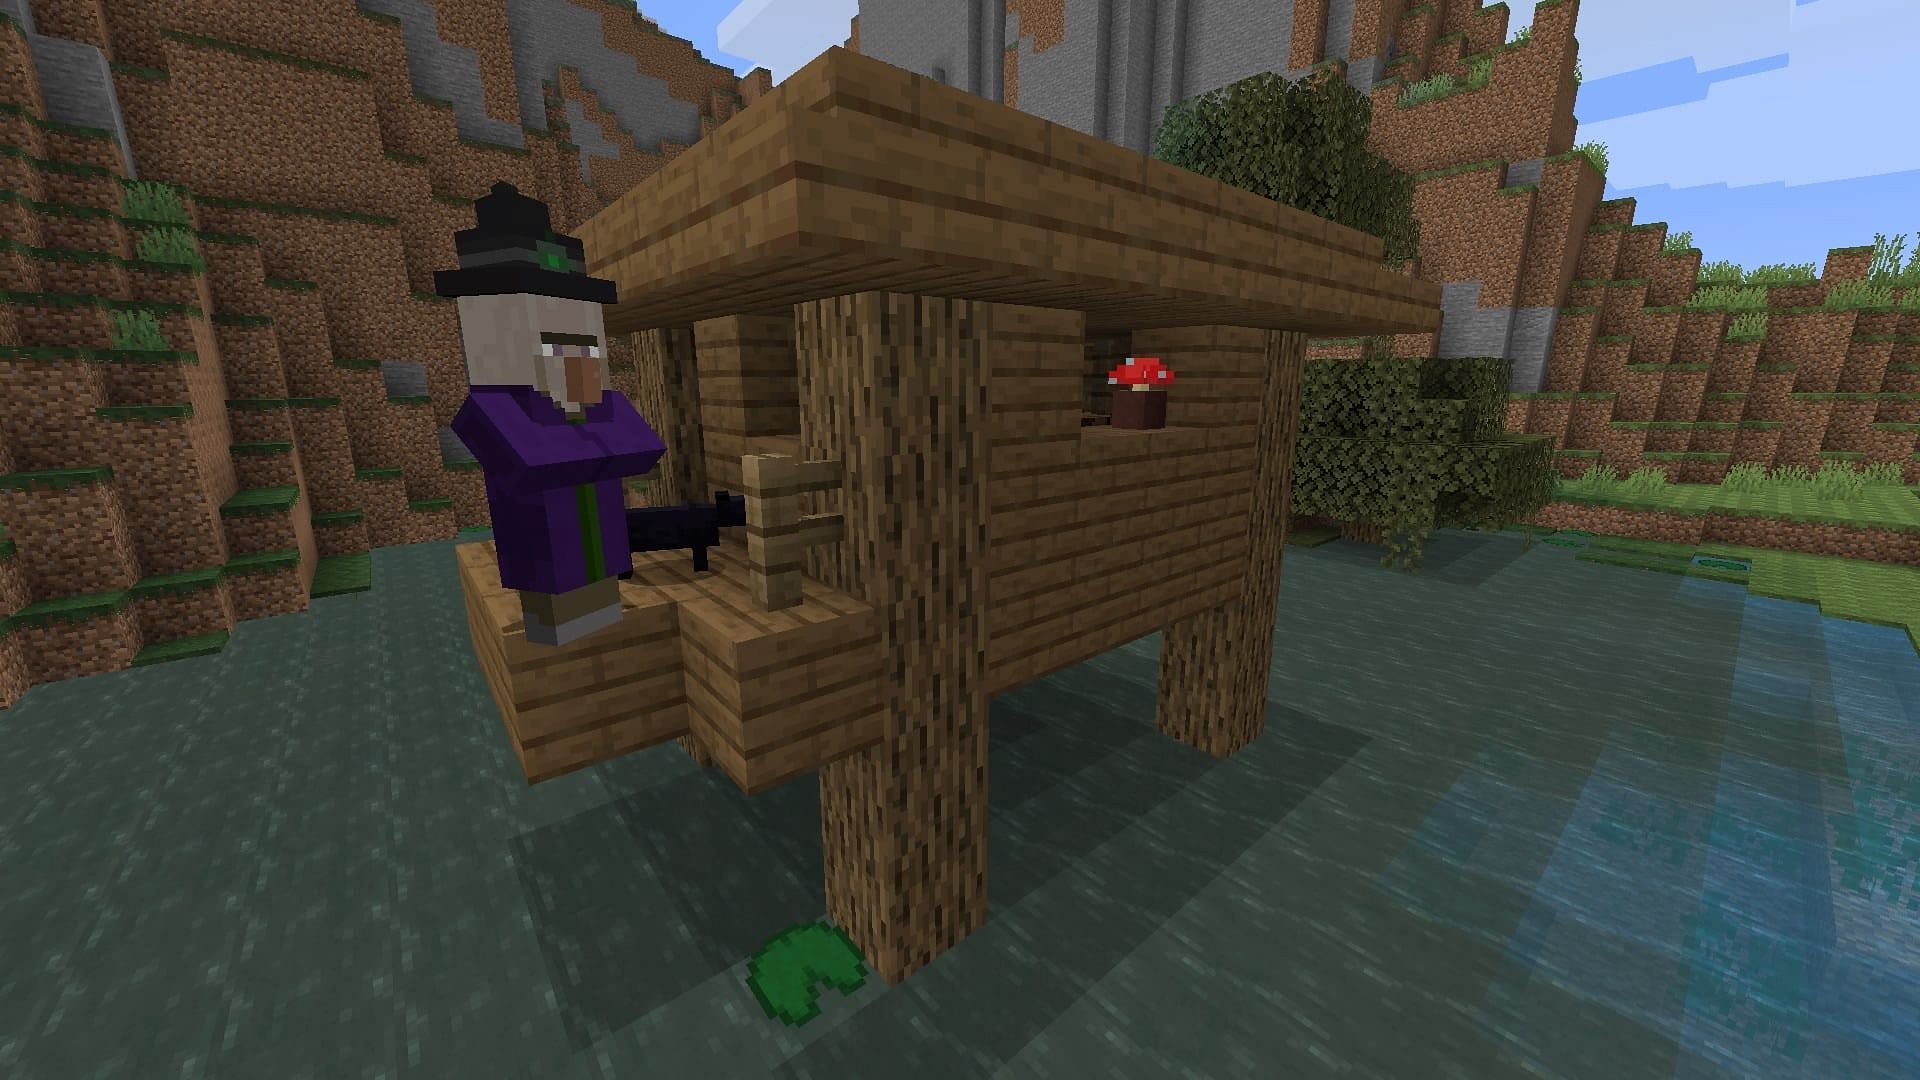 A witch rests on the porch of its hut (Image via Mojang)